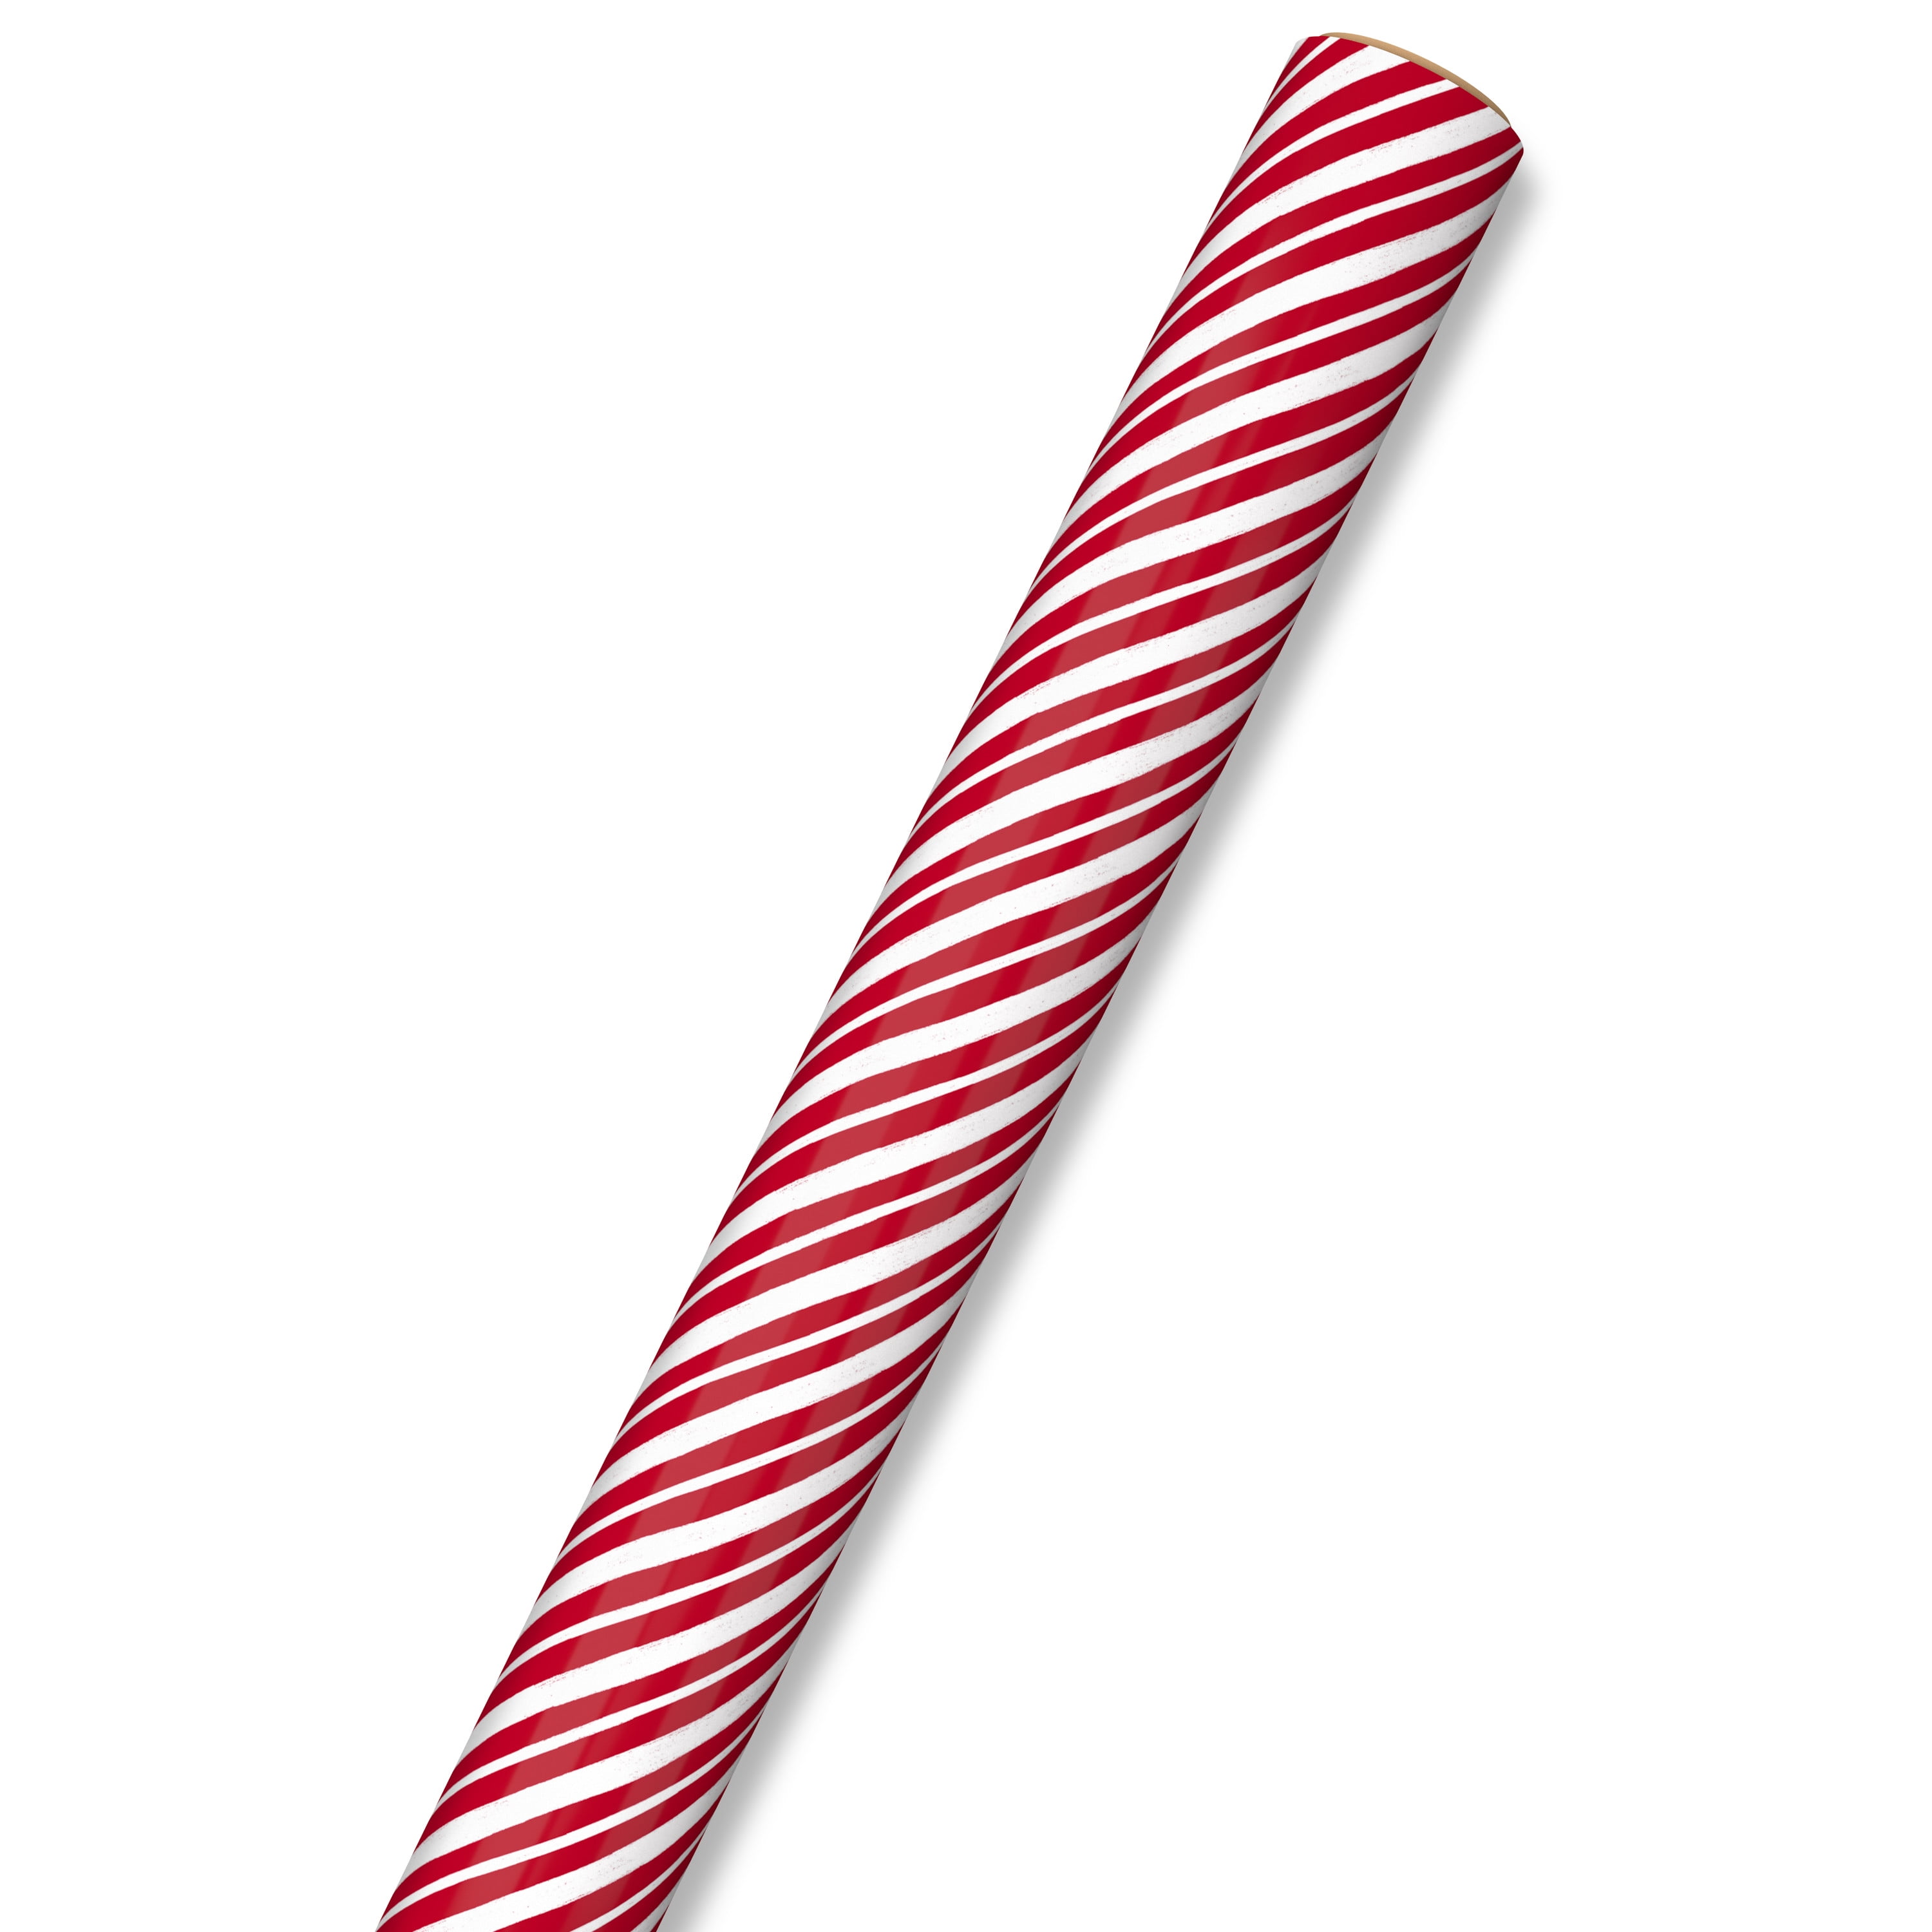 Hallmark Christmas Wrapping Paper (Candy Cane Stripes)